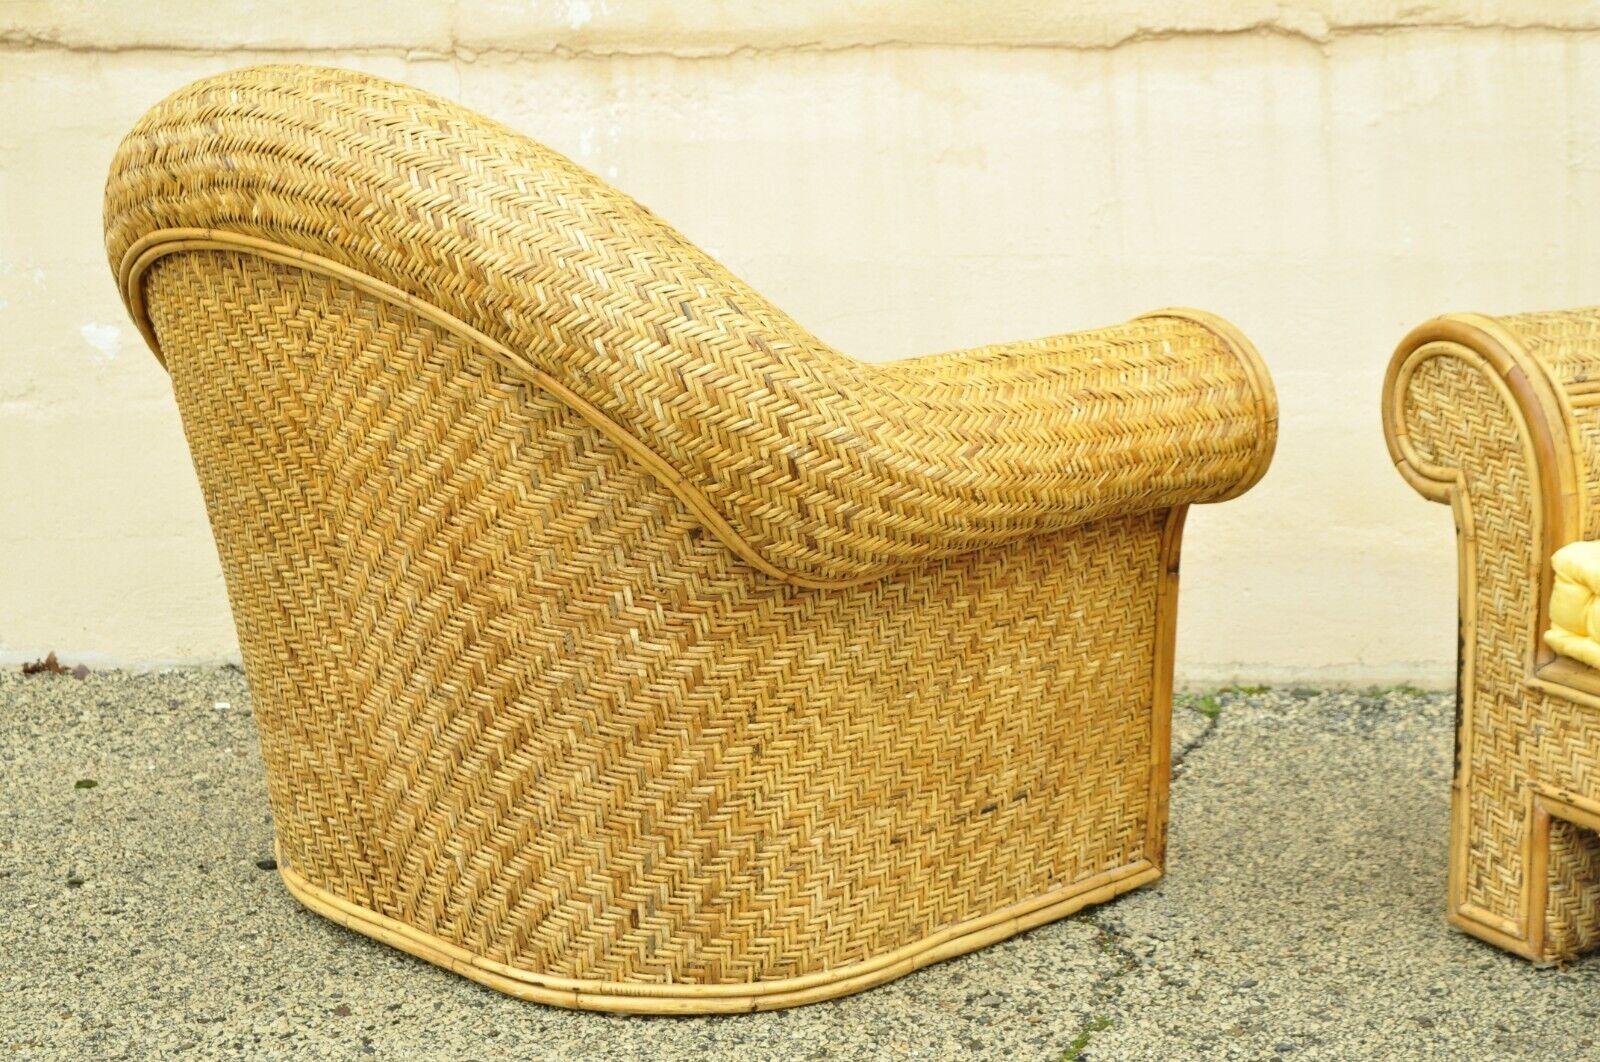 Ralph Lauren Attr. Large Woven Wicker Rattan Club Lounge Chairs - a Pair For Sale 7